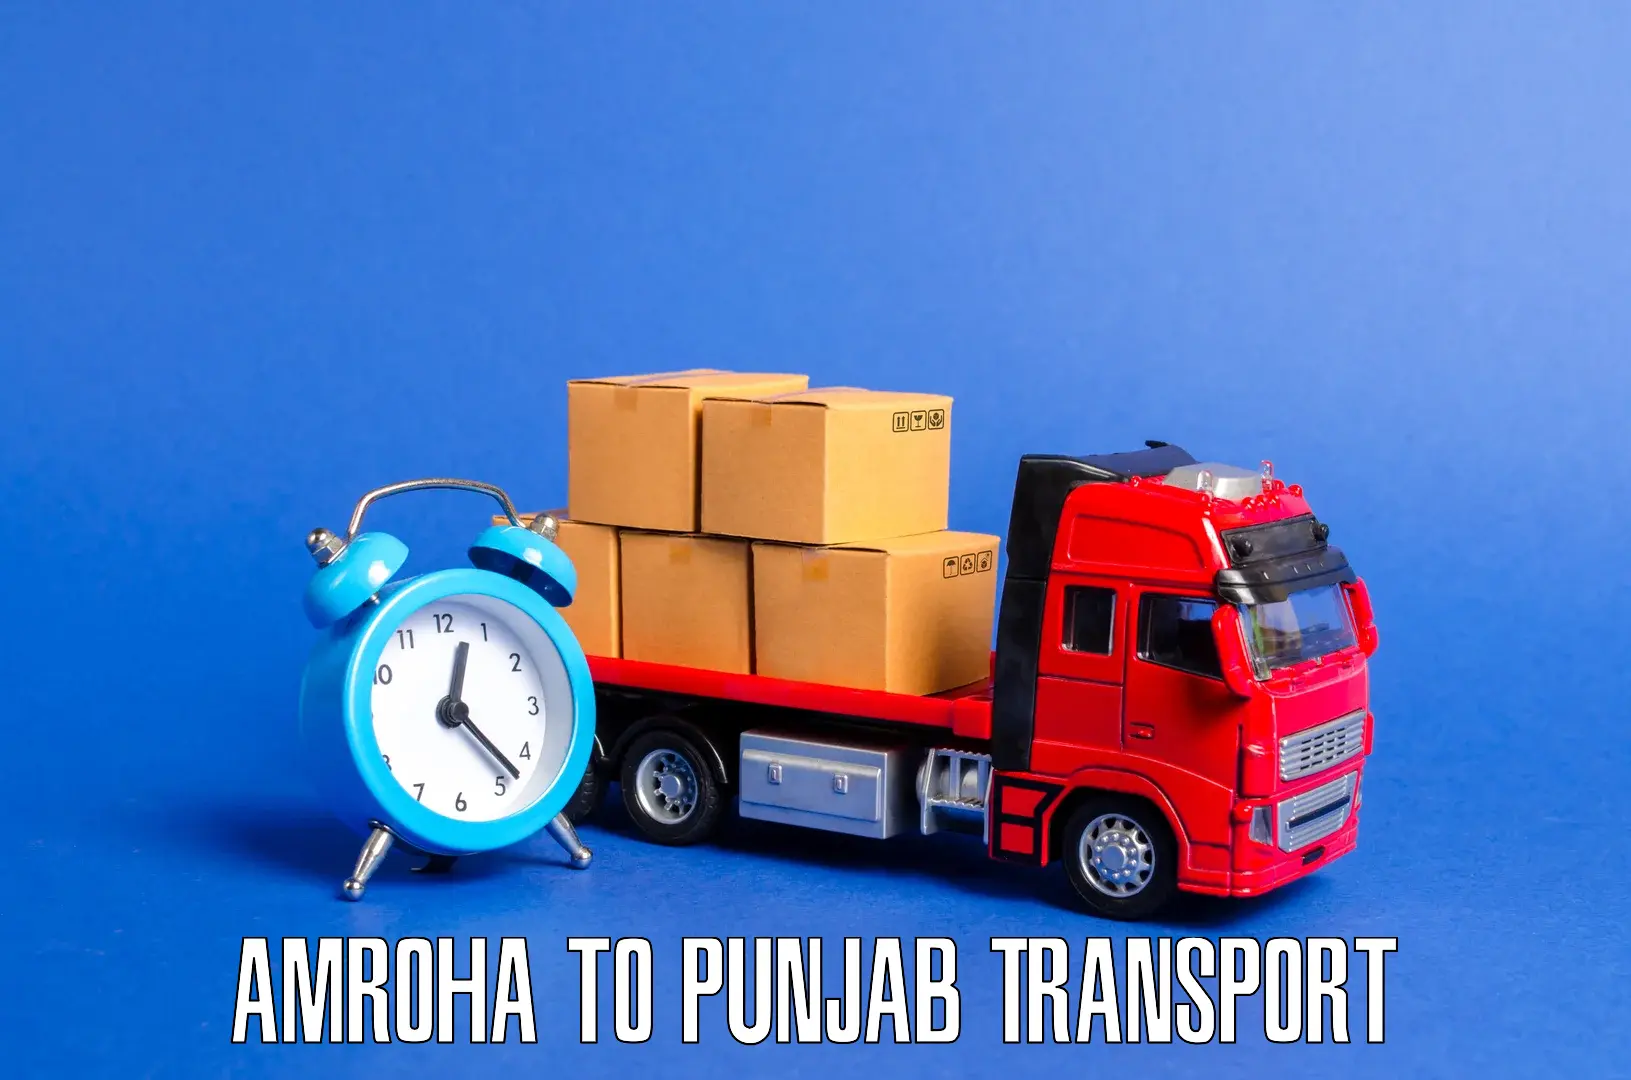 Land transport services in Amroha to Amritsar